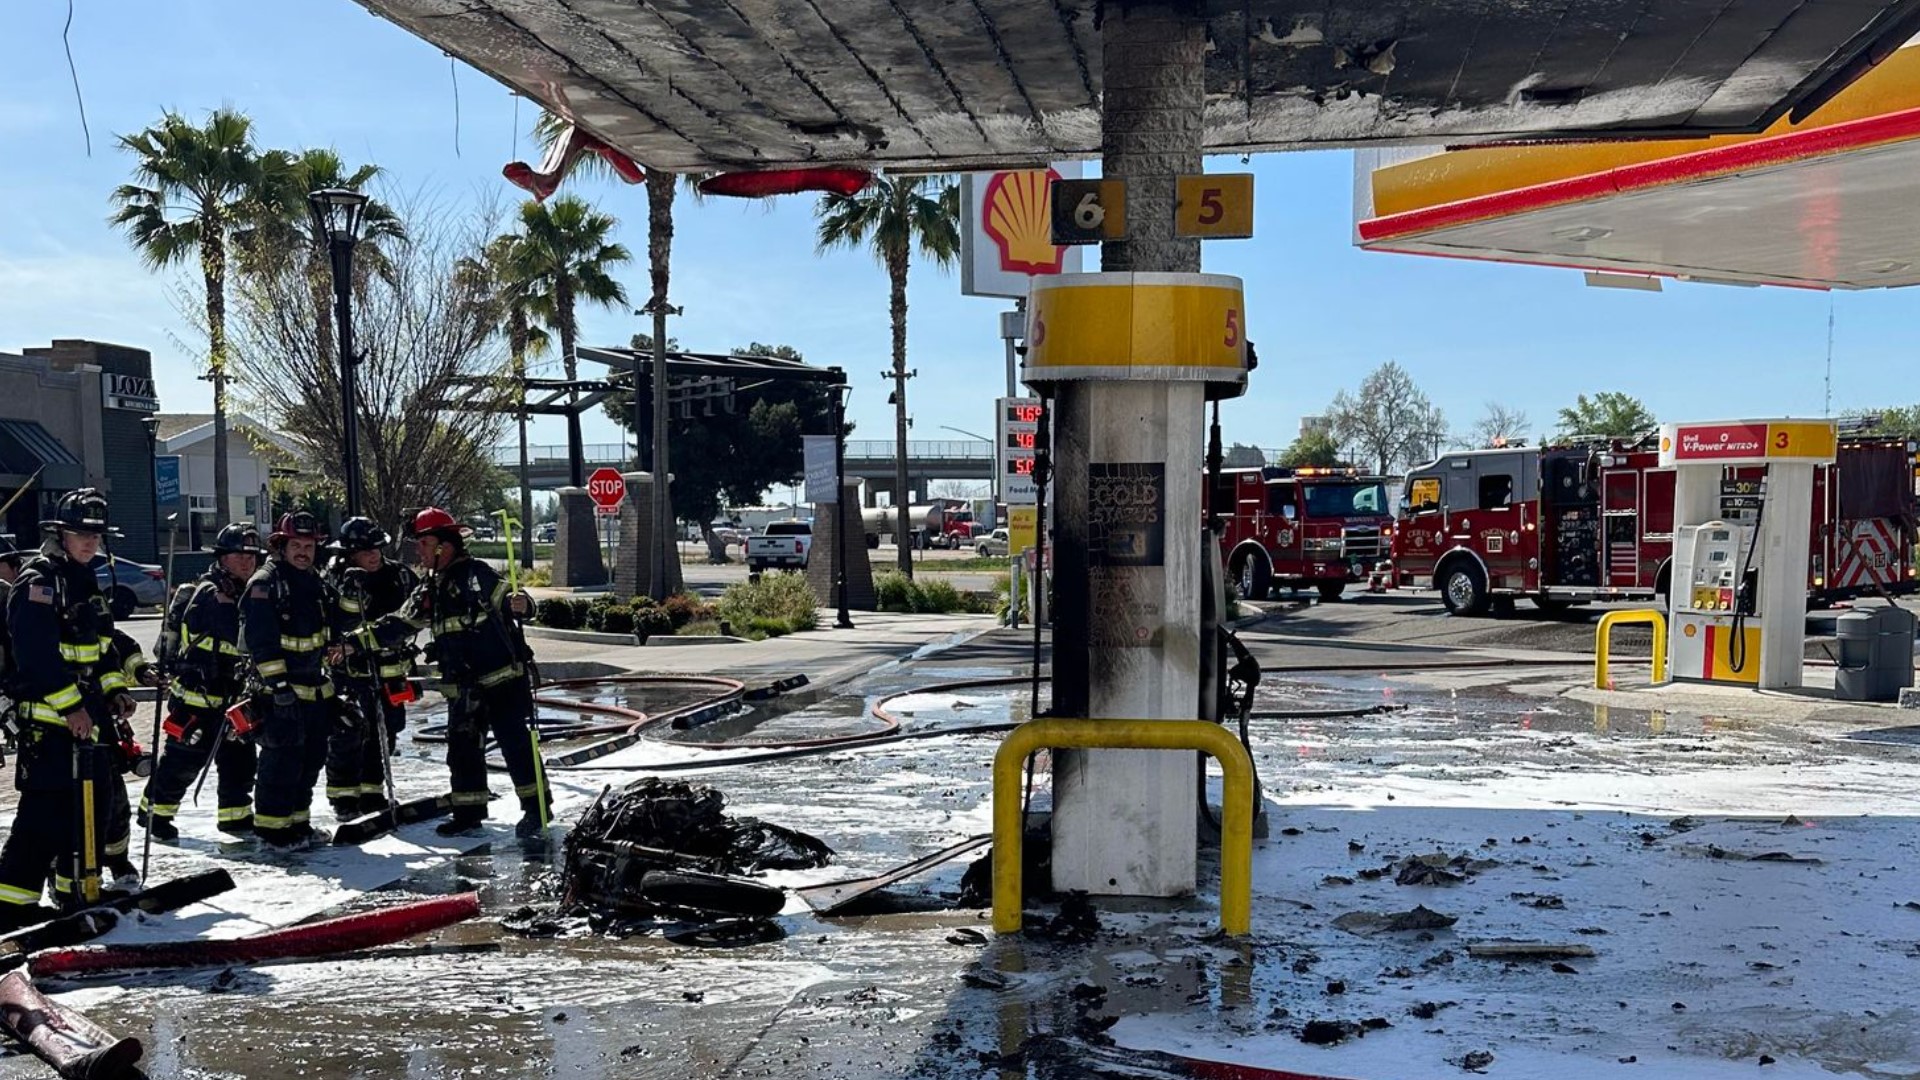 The Modesto Fire Department said this happened at the Shell gas station on 4th Street in Ceres.